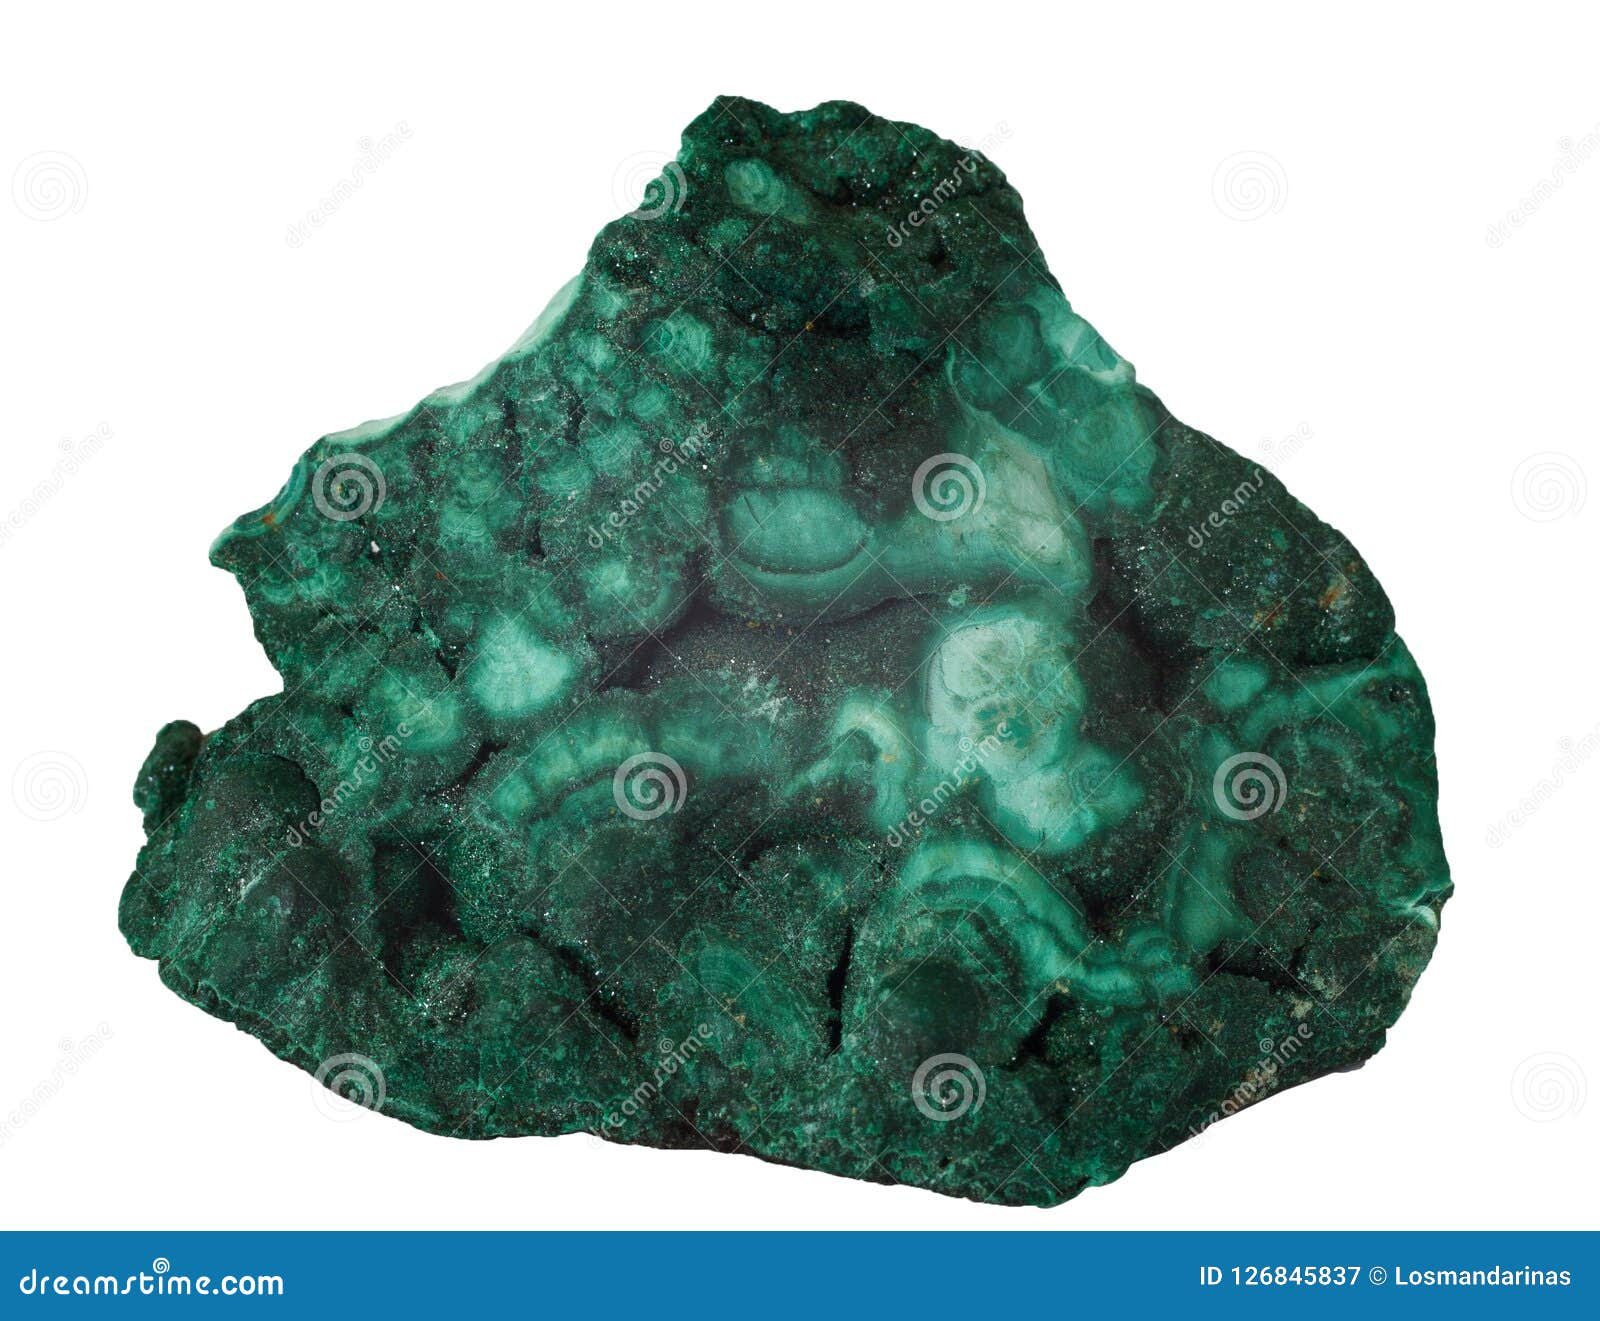 Organo golpear ir a buscar Deep Green Malachite Mineral Isolated Stock Image - Image of petrography,  natural: 126845837